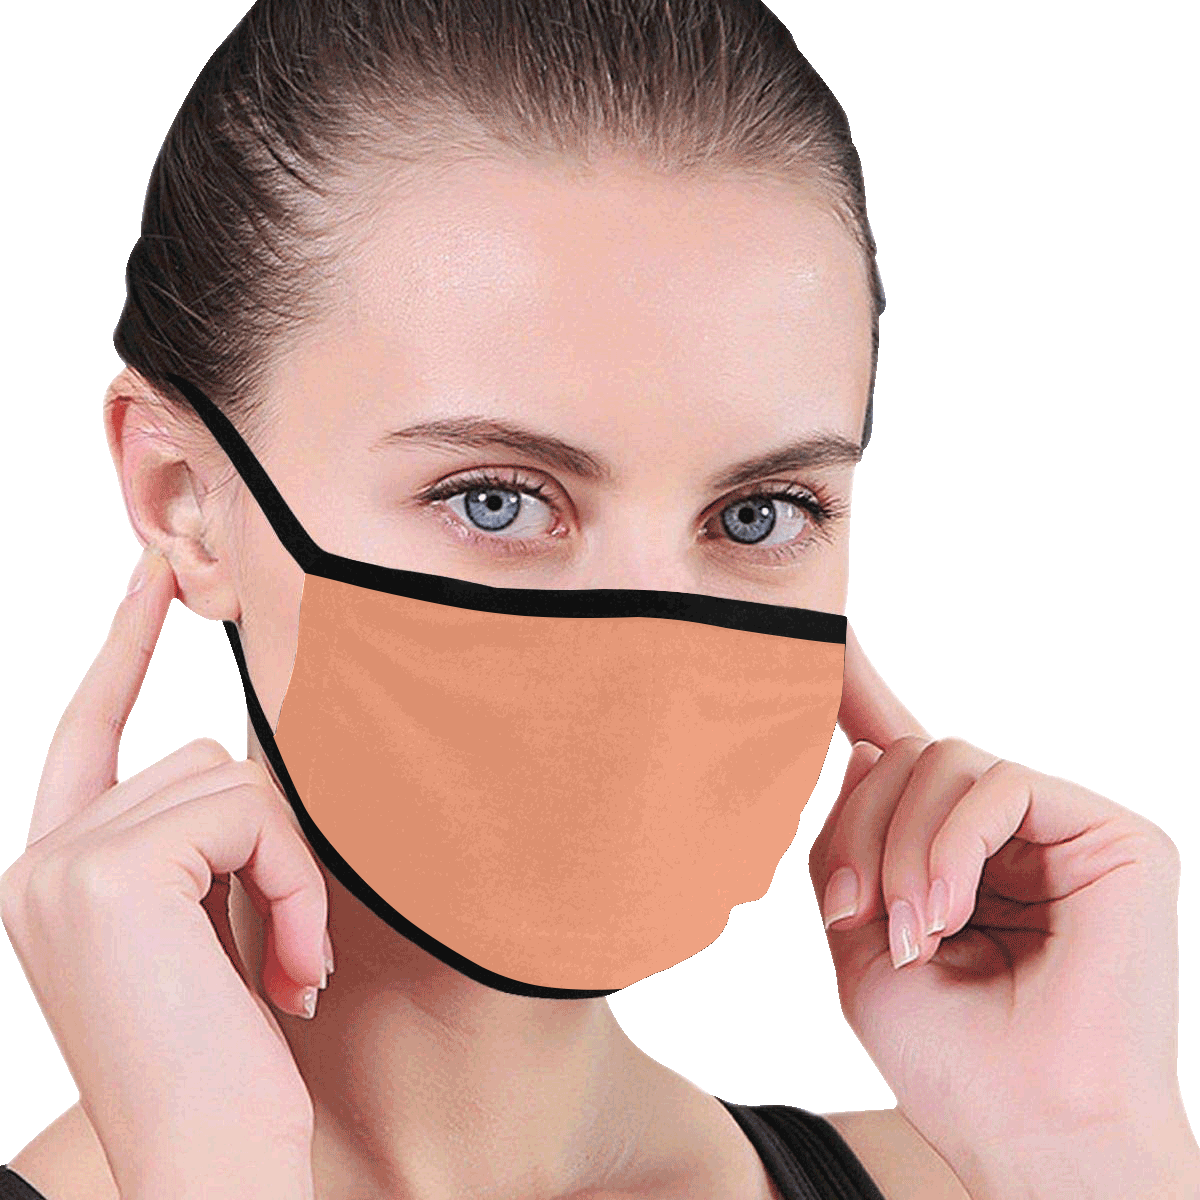 color light salmon Mouth Mask (30 Filters Included) (Non-medical Products)